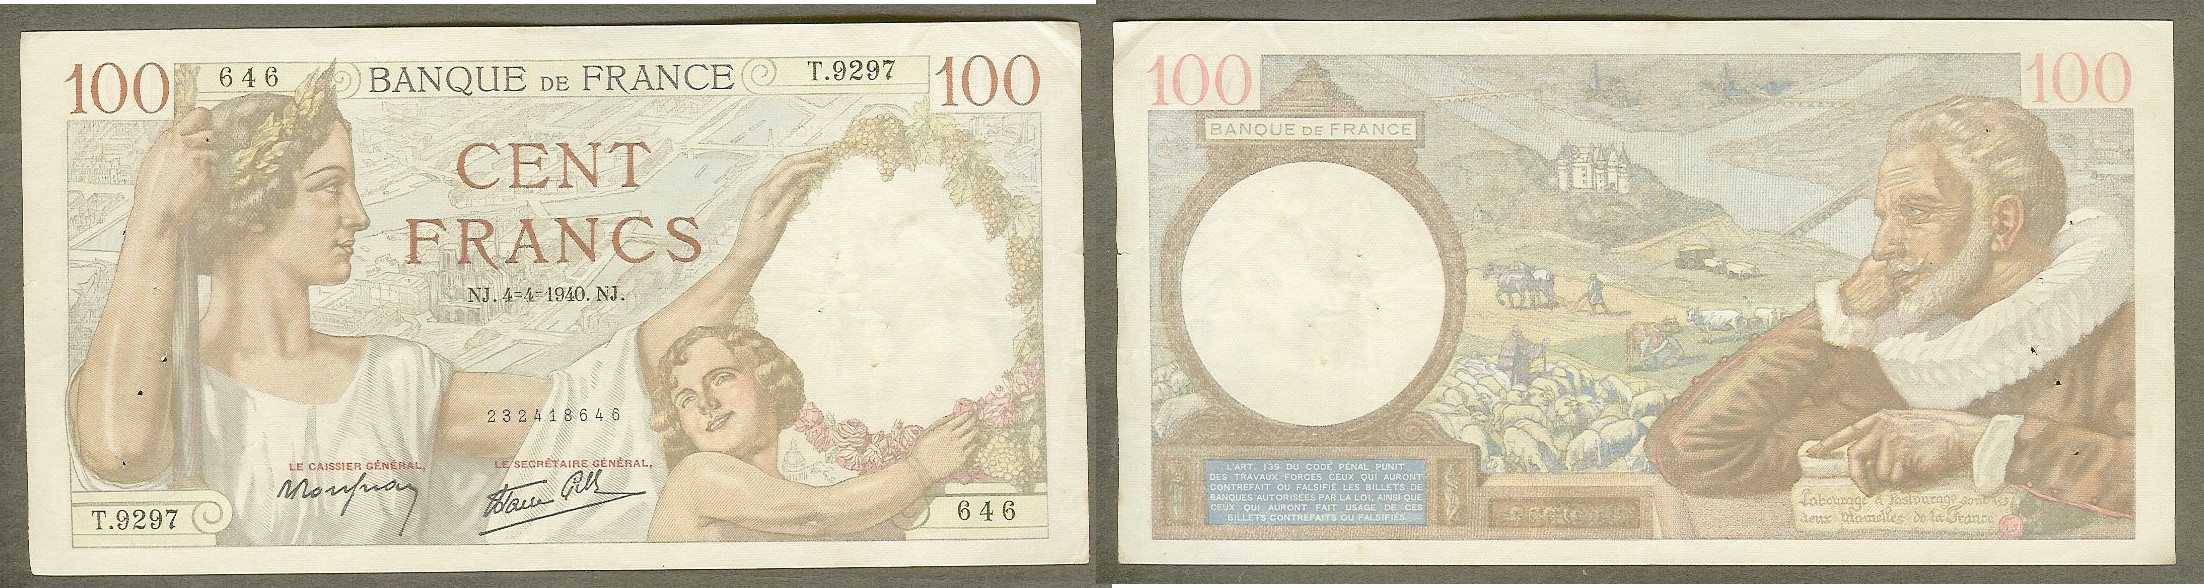 100 francs Sully 4.4.1940 aEF